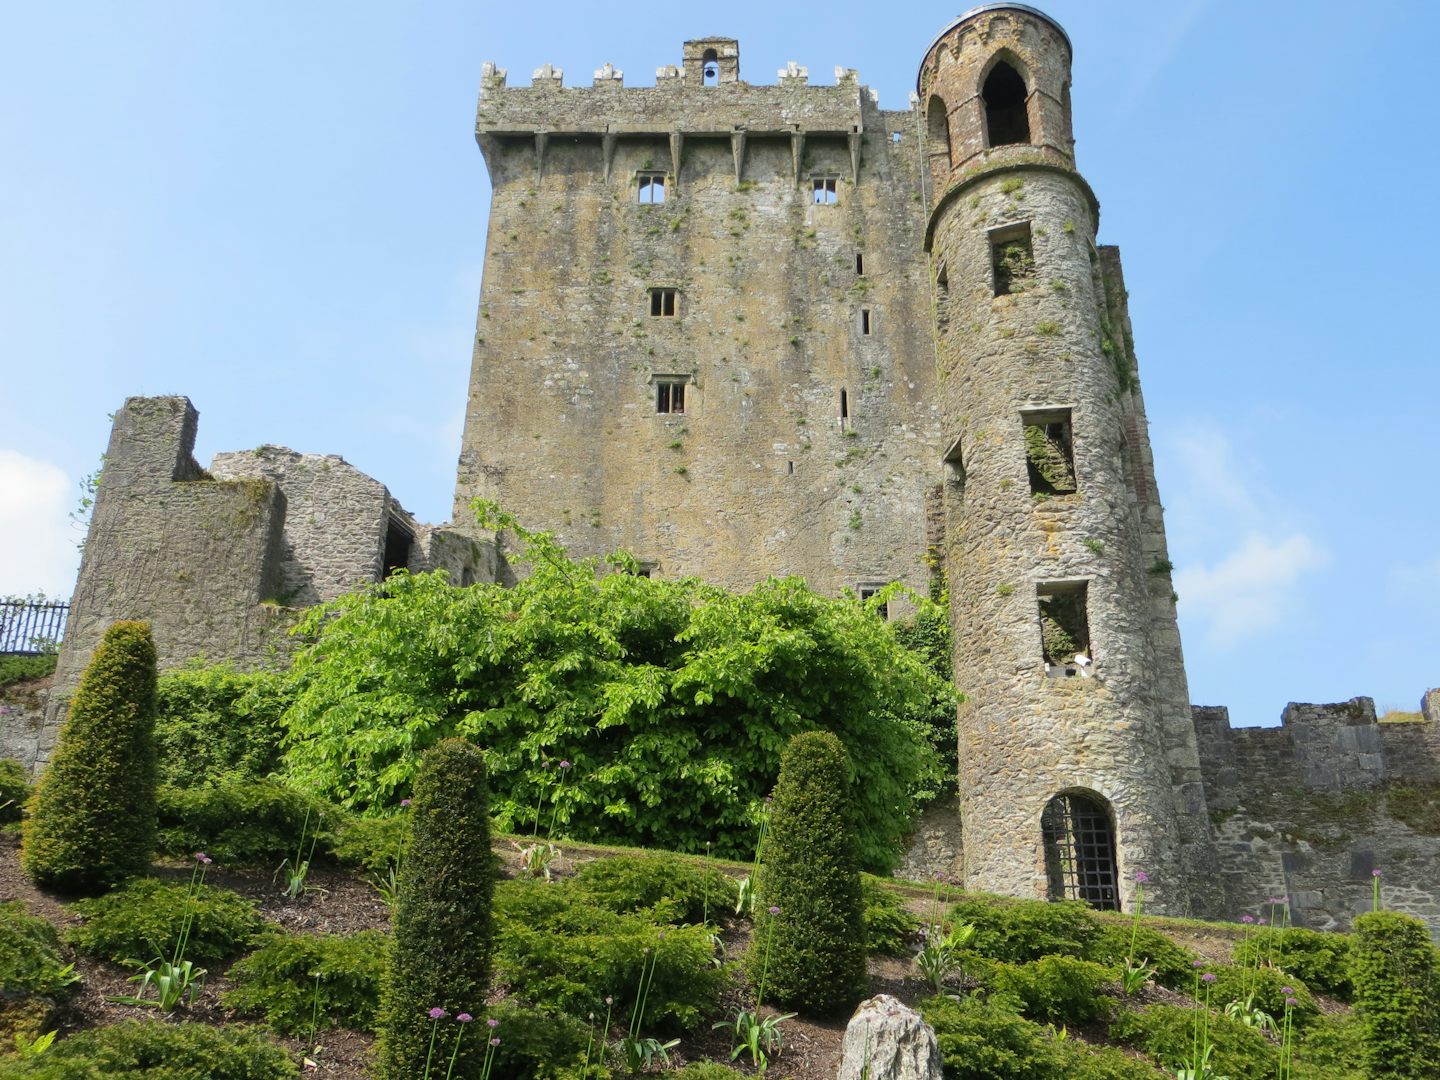 Blarney Castle in Ireland during Celebrity shore excursion that included ot